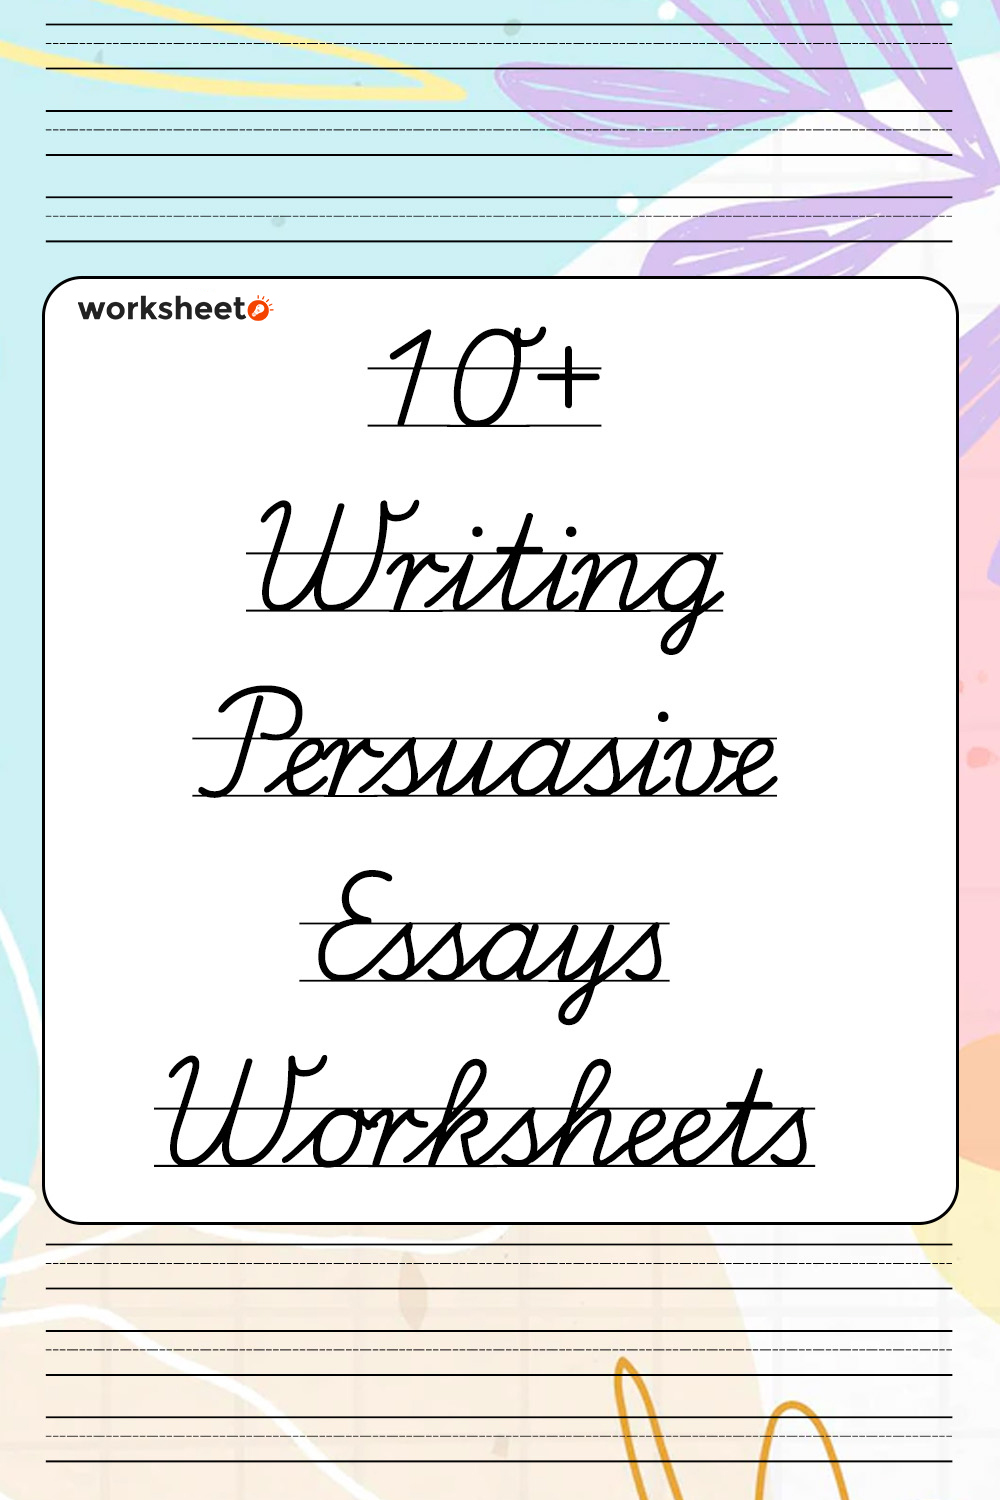 17 Images of Writing Persuasive Essays Worksheets